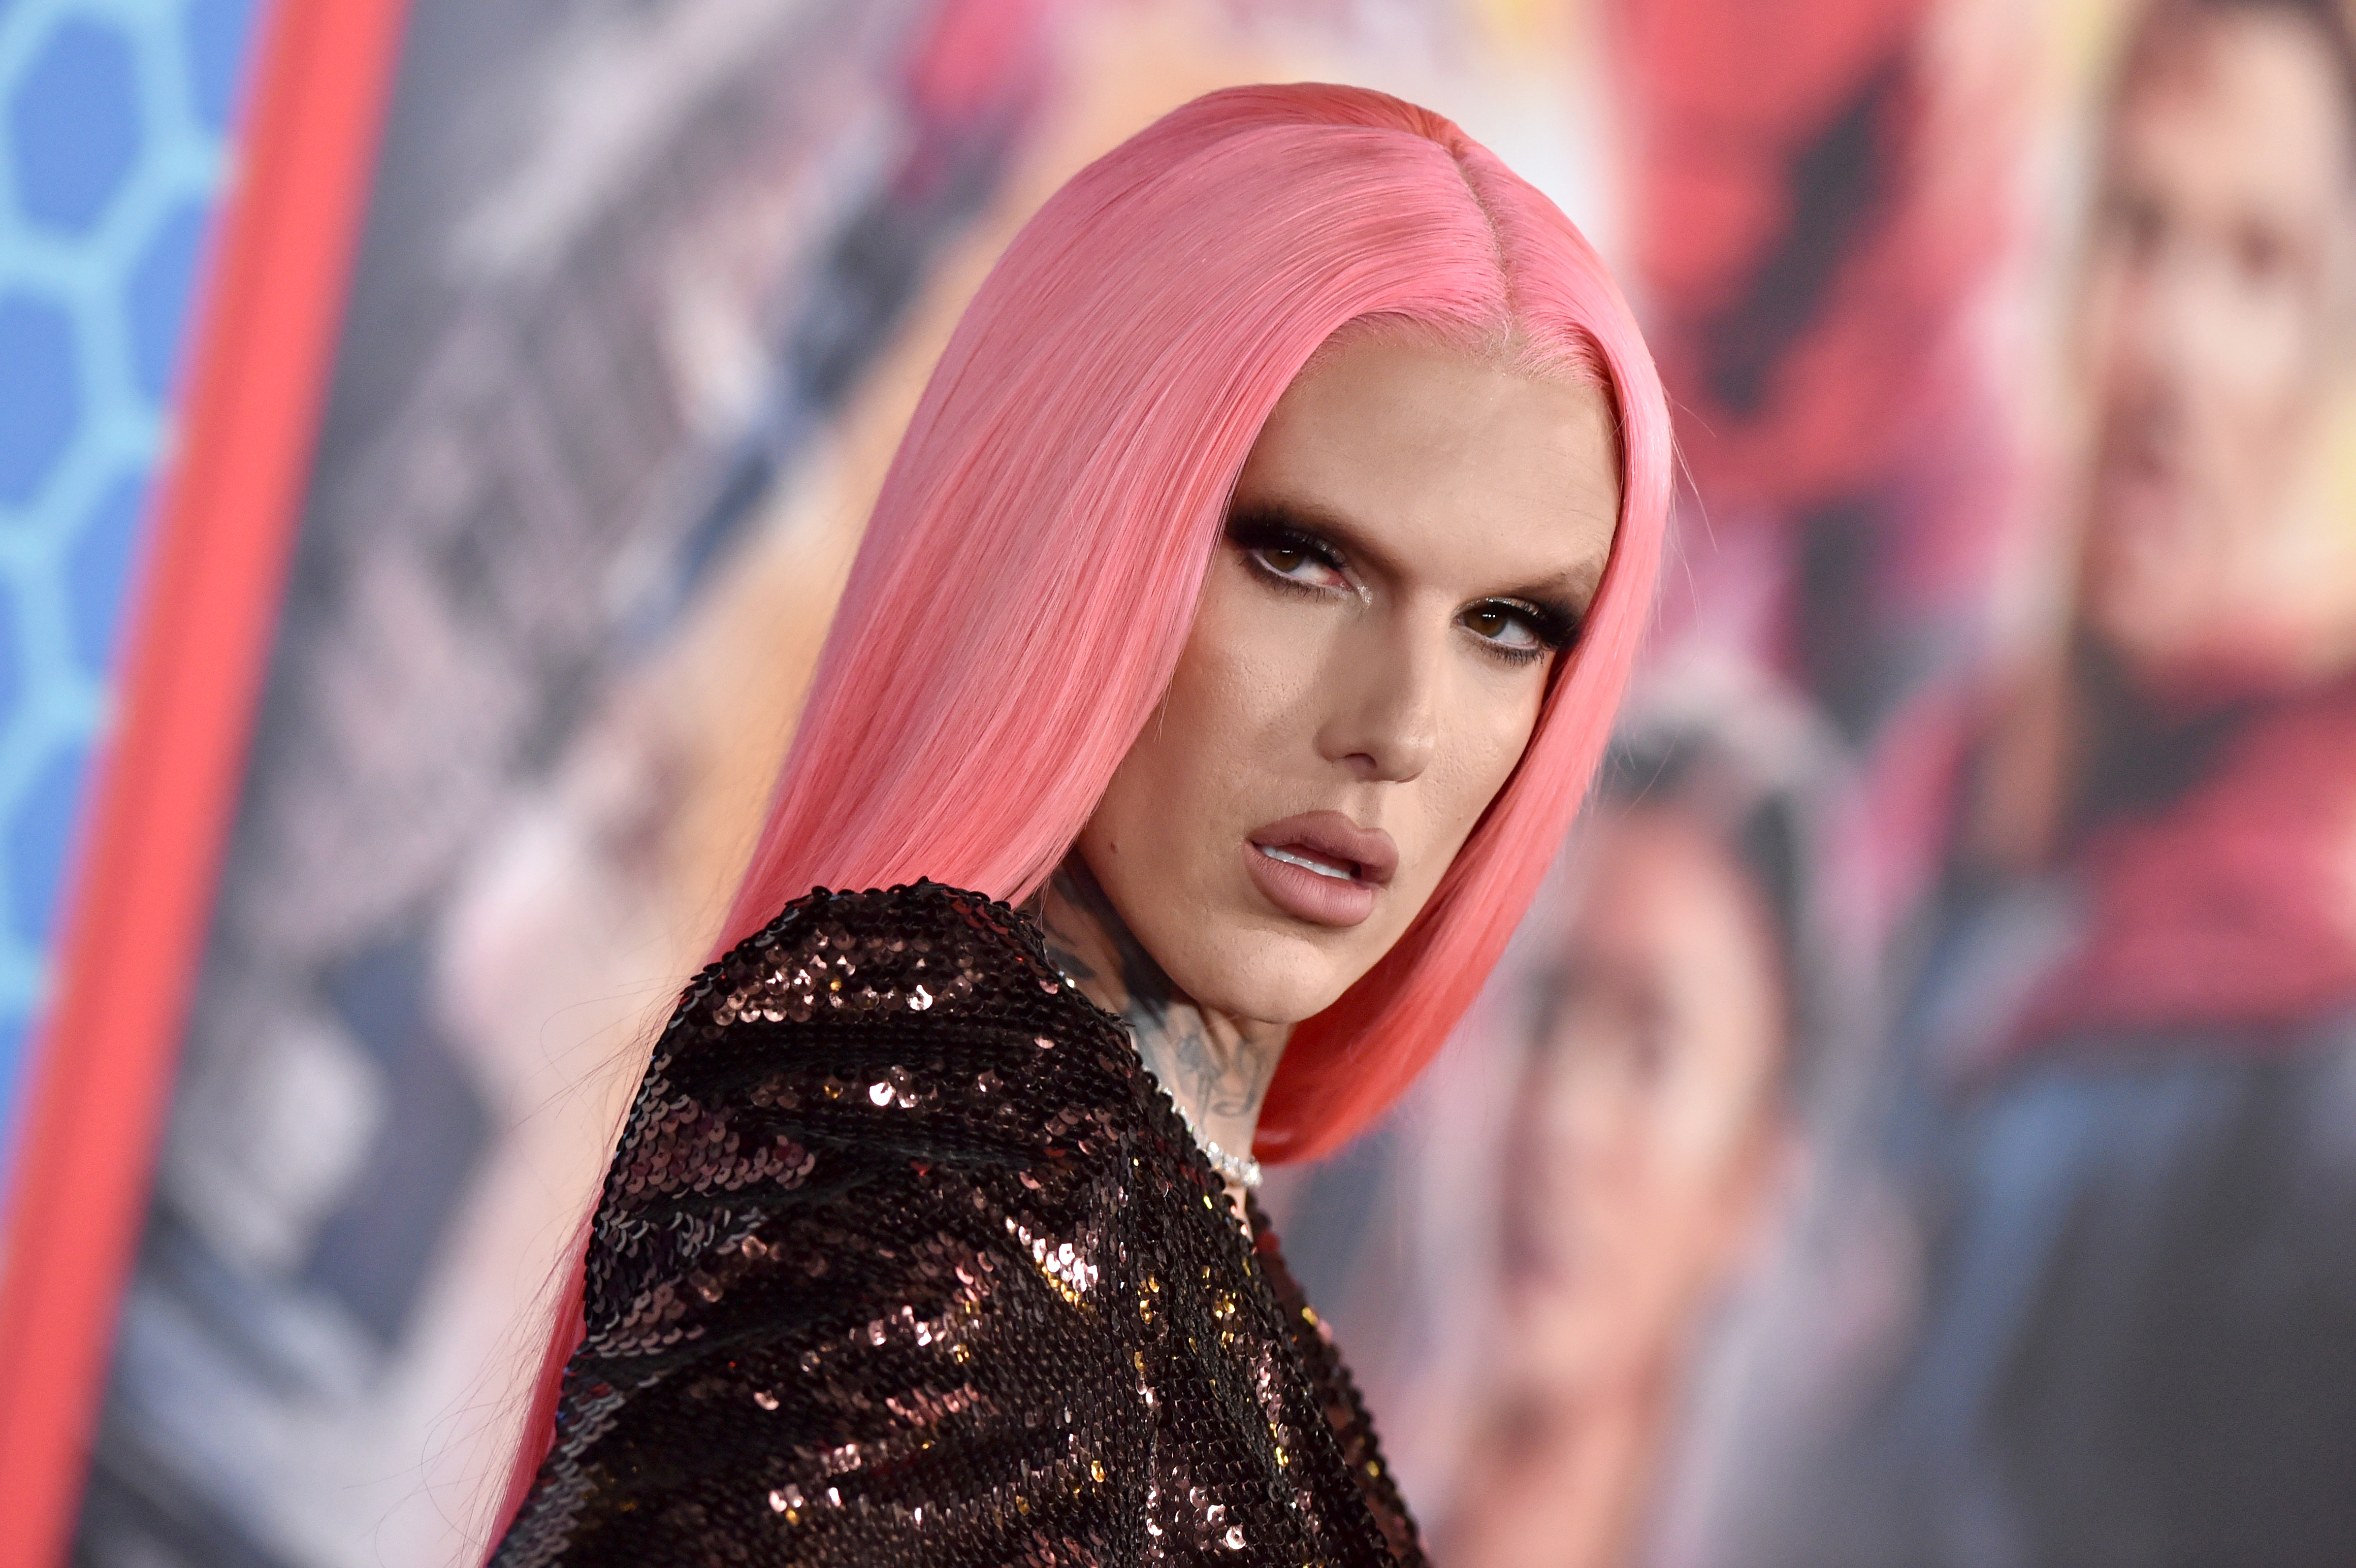 Jeffree Star attends Sony Pictures' "Spider-Man: No Way Home" premiere on December 13, 2021, in Los Angeles, California. | Source: Getty Images